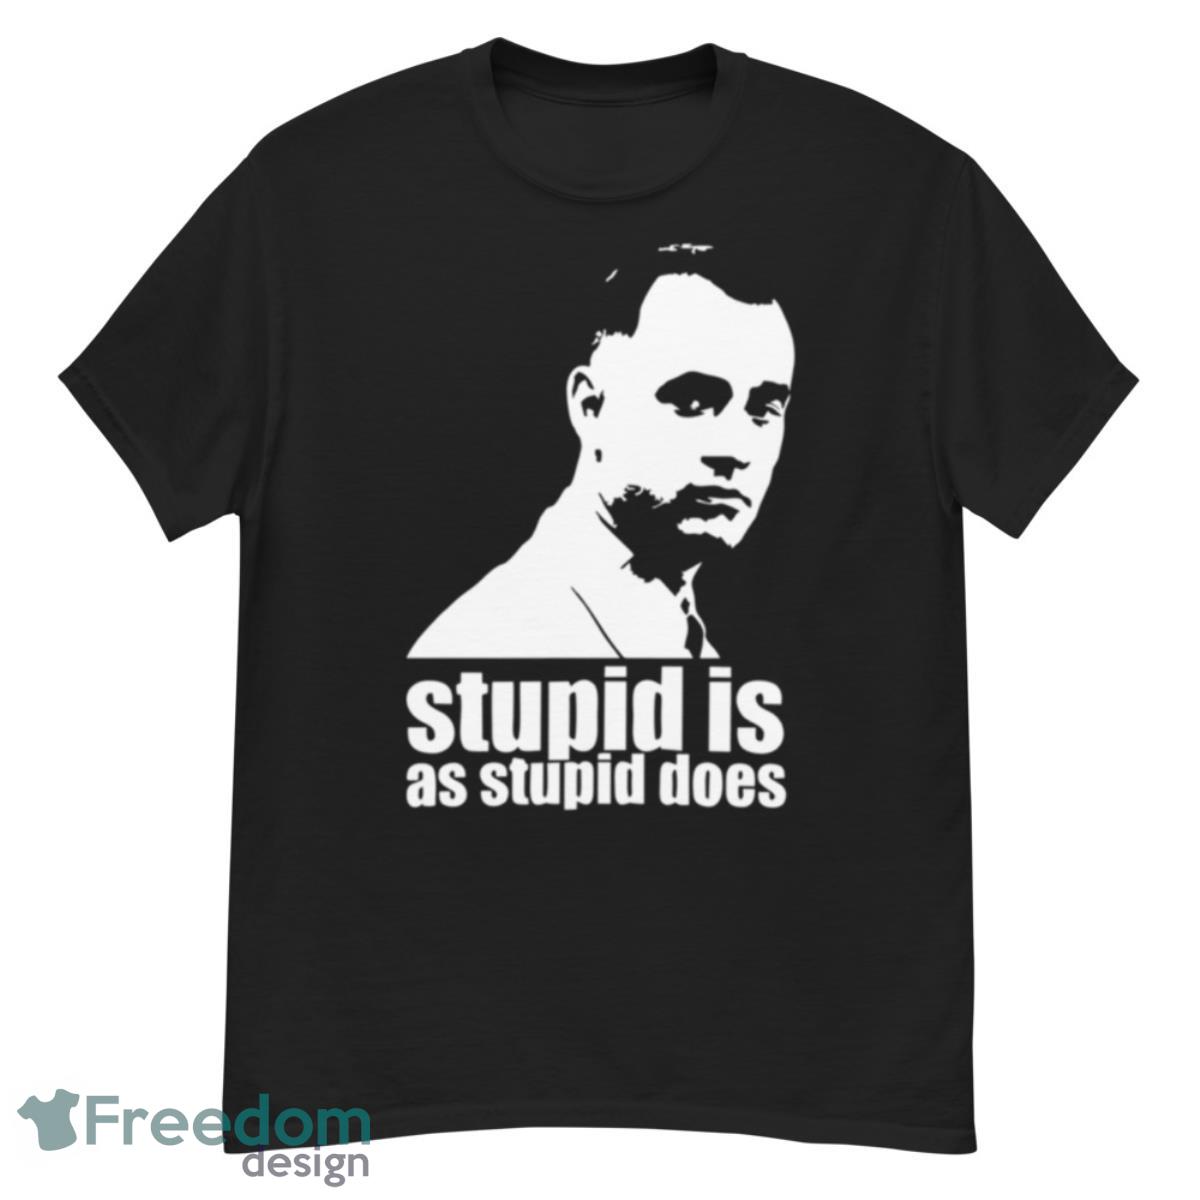 Stupid Is As Stupid Does Forrest Gump Artwork shirt - G500 Men’s Classic T-Shirt